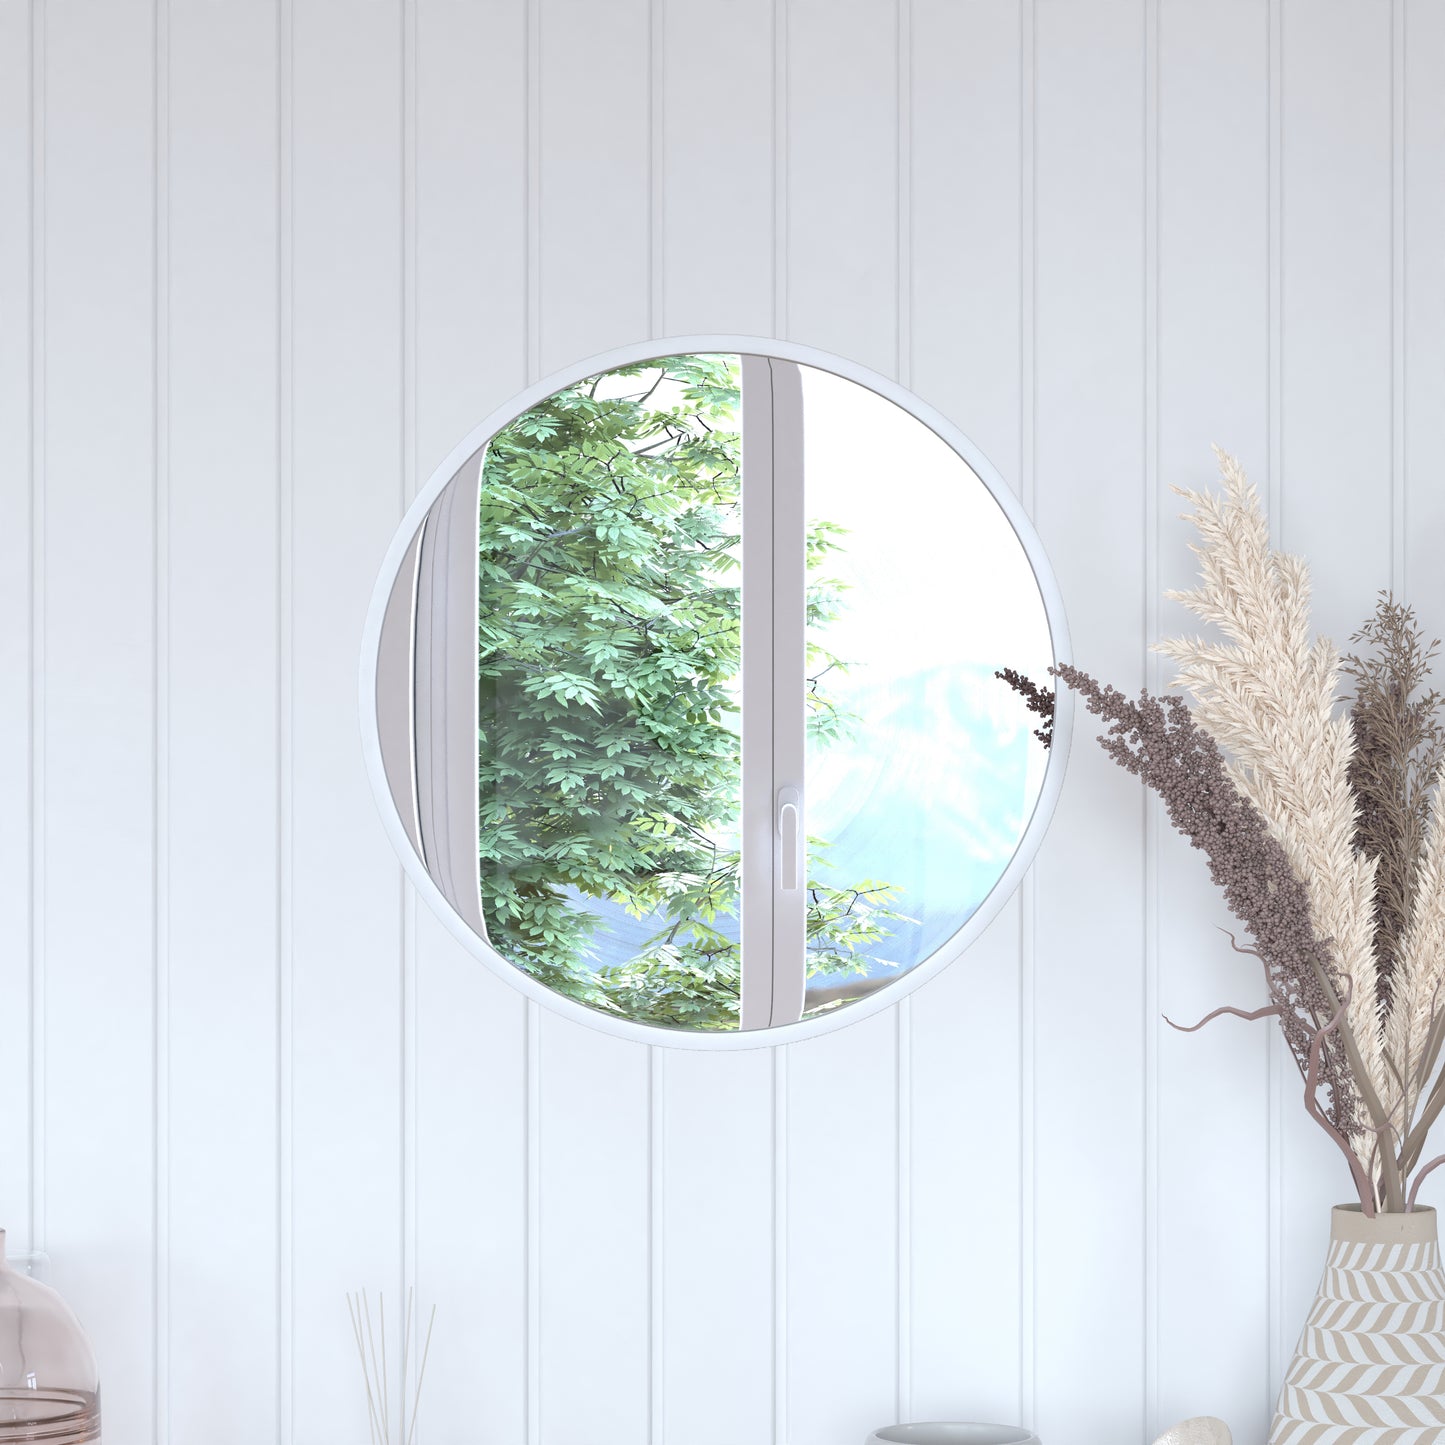 Silver 20" Round Wall Mirror HFKHD-0GD-CRE8-991315-GG